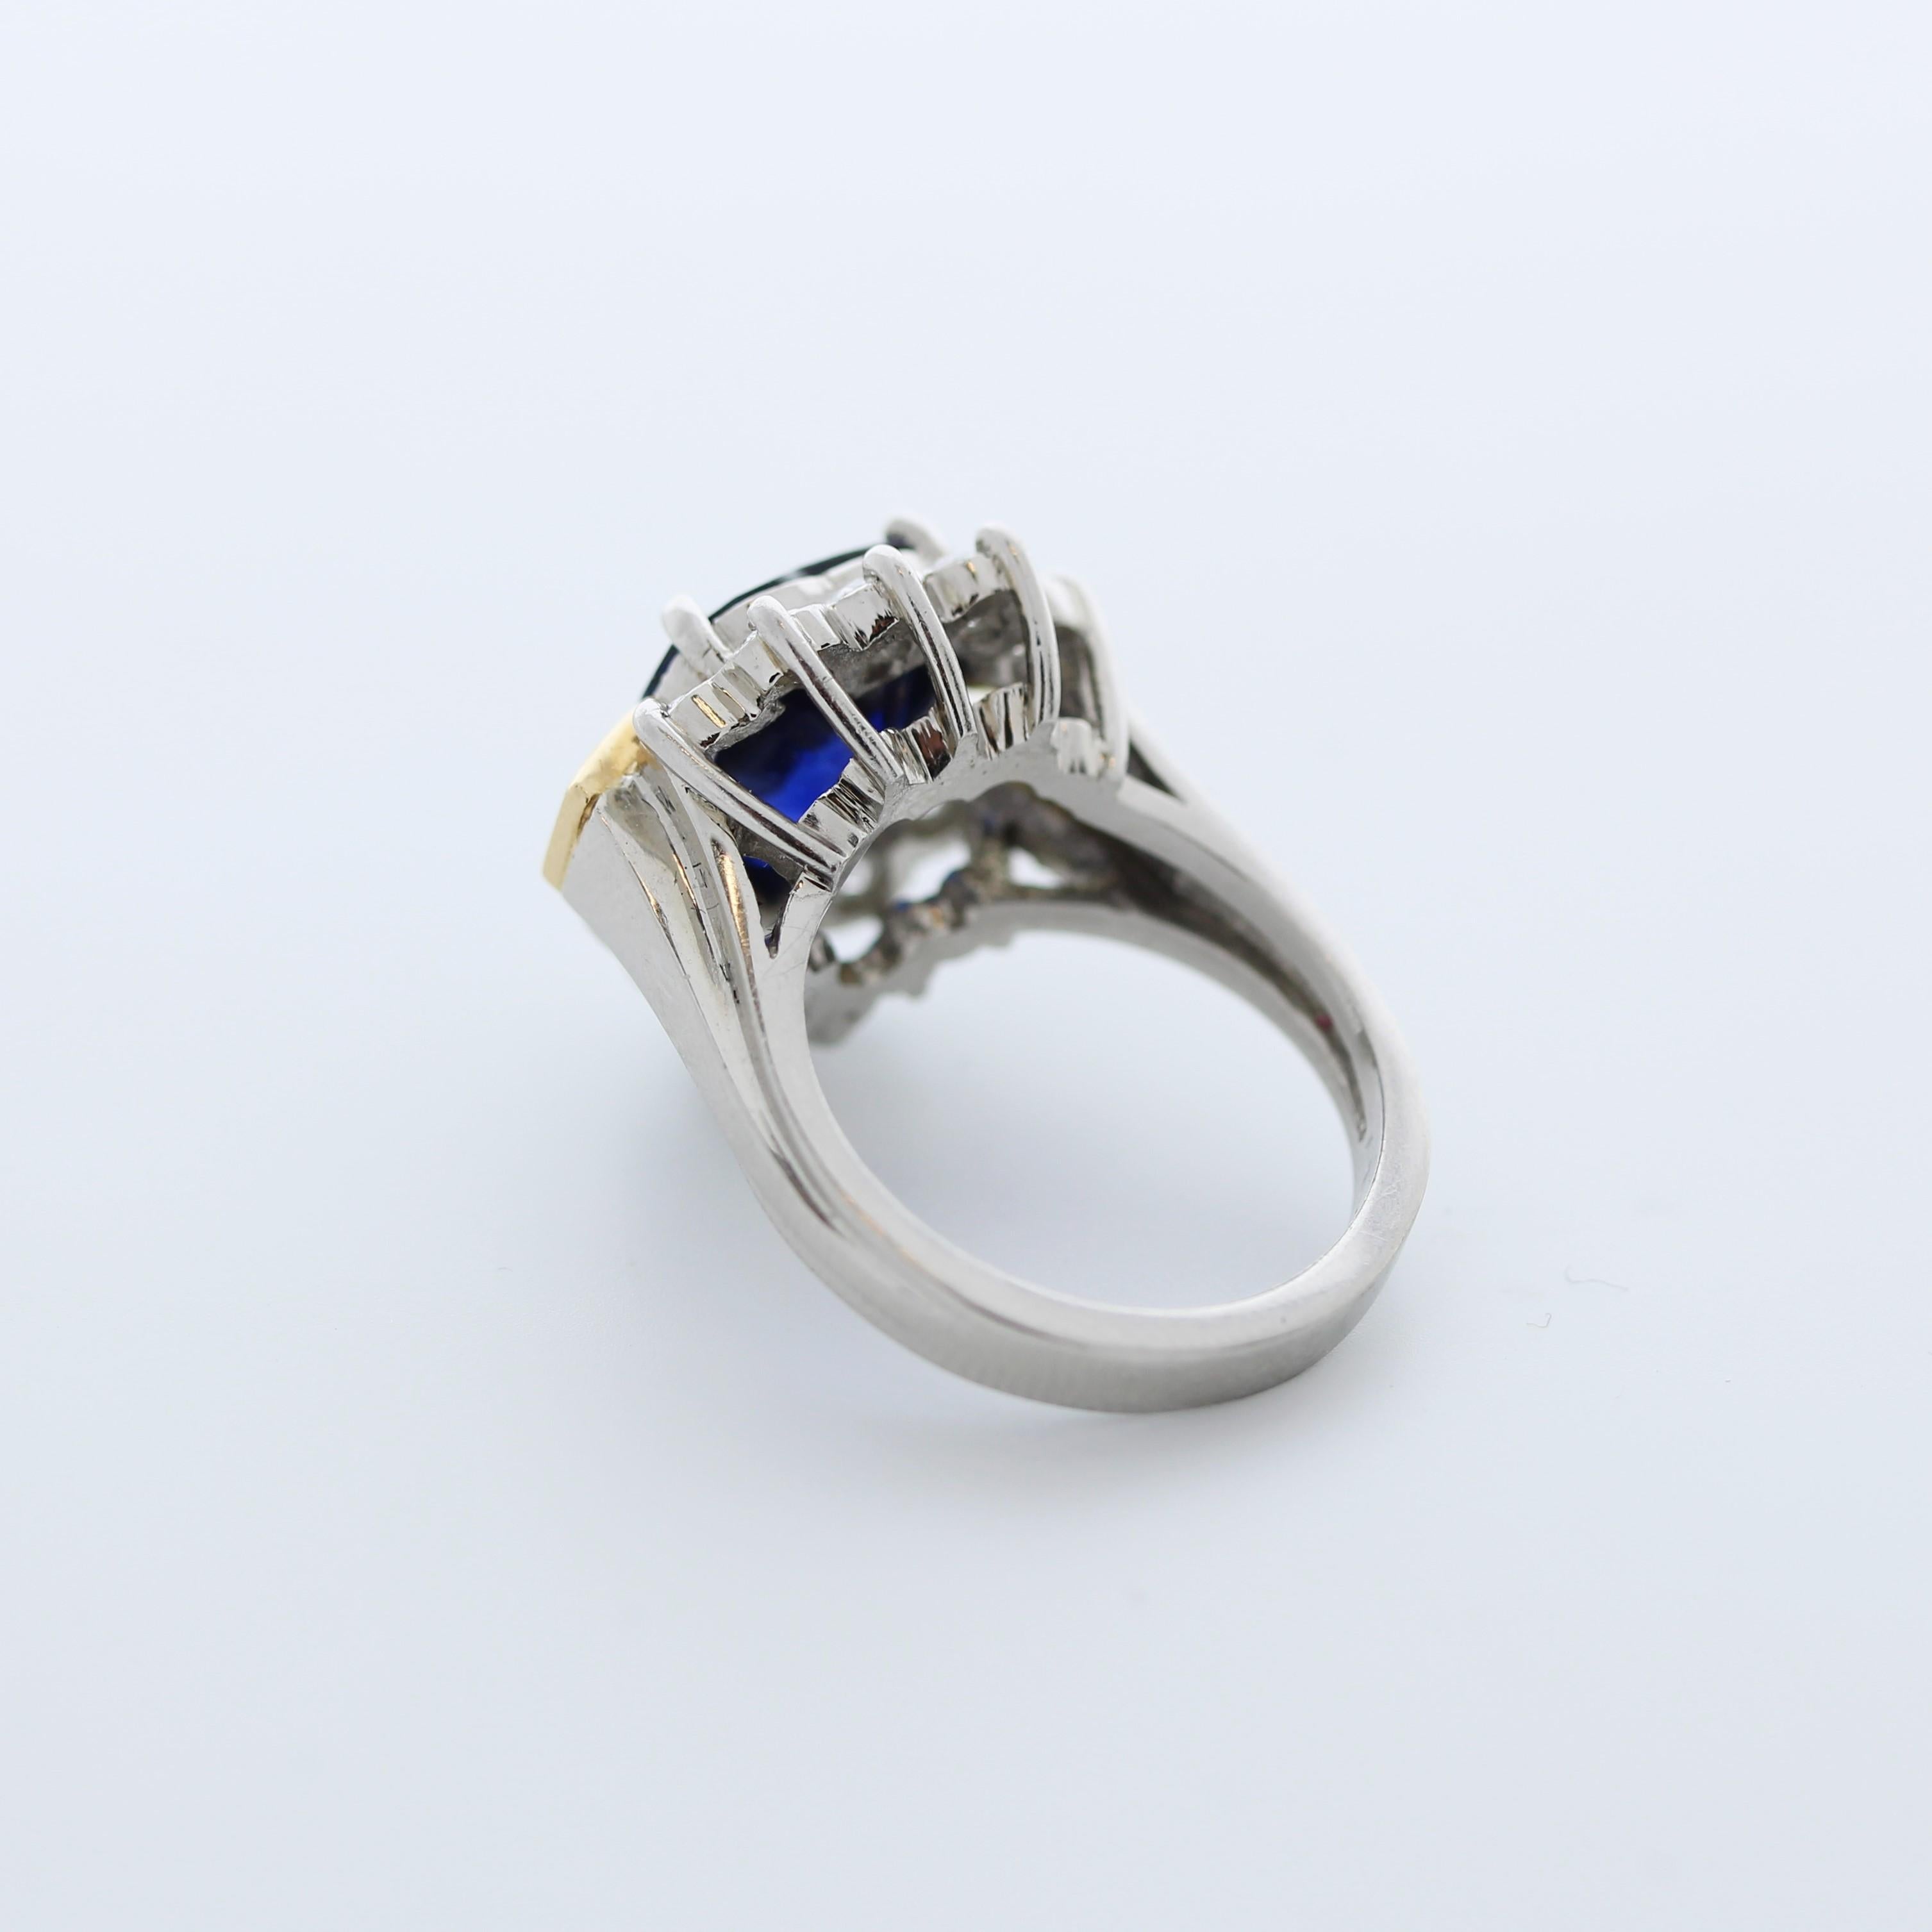 Contemporary 4.99 Carat Weight Gemstone Sapphire, Heart Shape In Platinum & 18K Yellow Gold For Sale